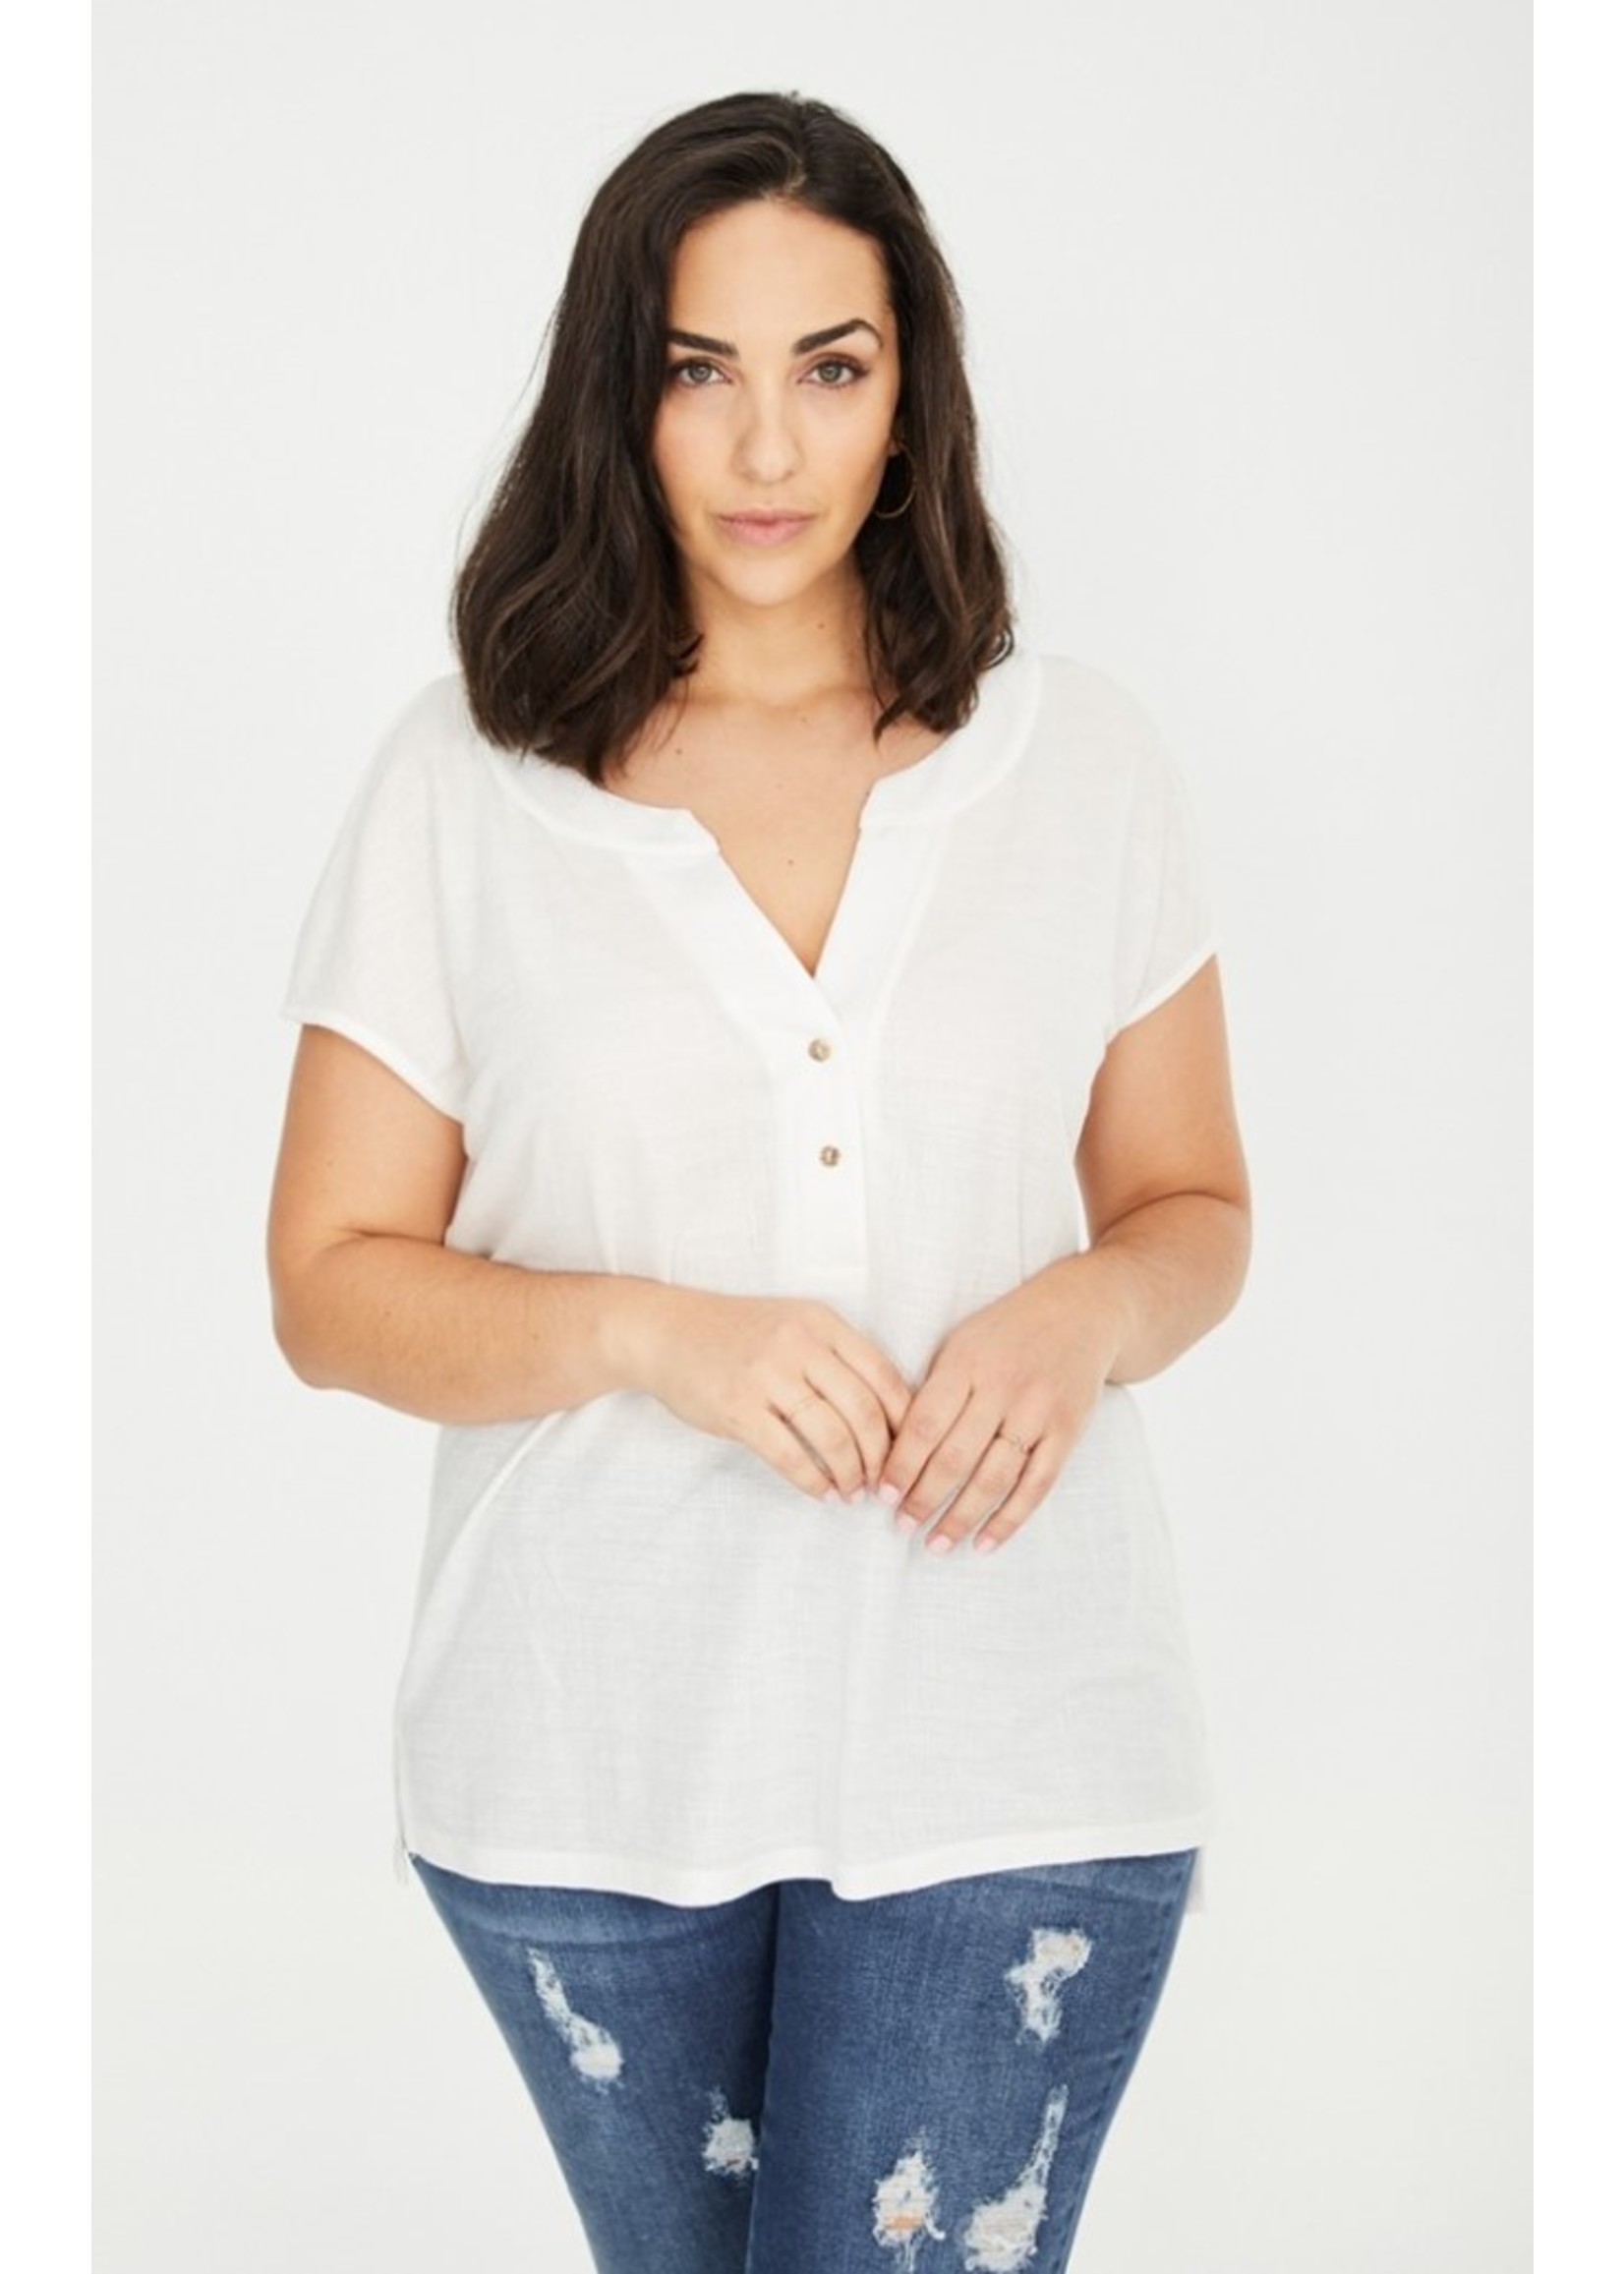 SPG Woman Short Sleeve Knit Top Button Up